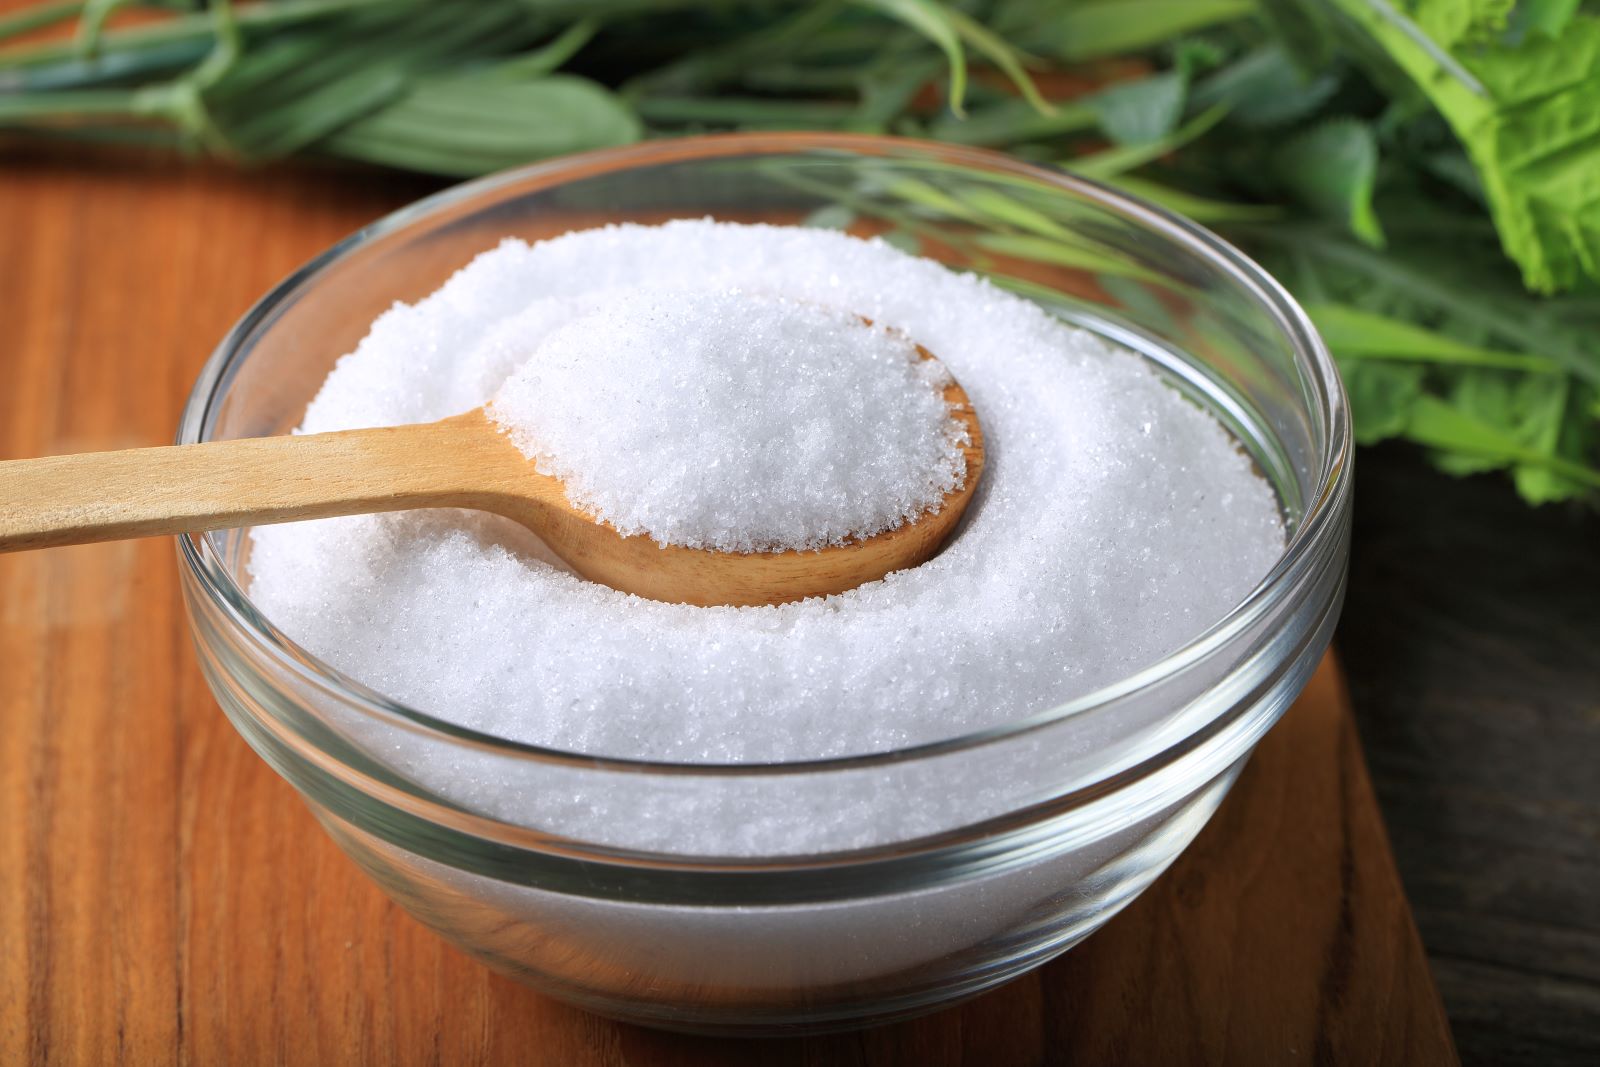 Allers breaks down the pros and cons of natural and artificial sugar alternatives, and some practical advice for those looking to cut back.